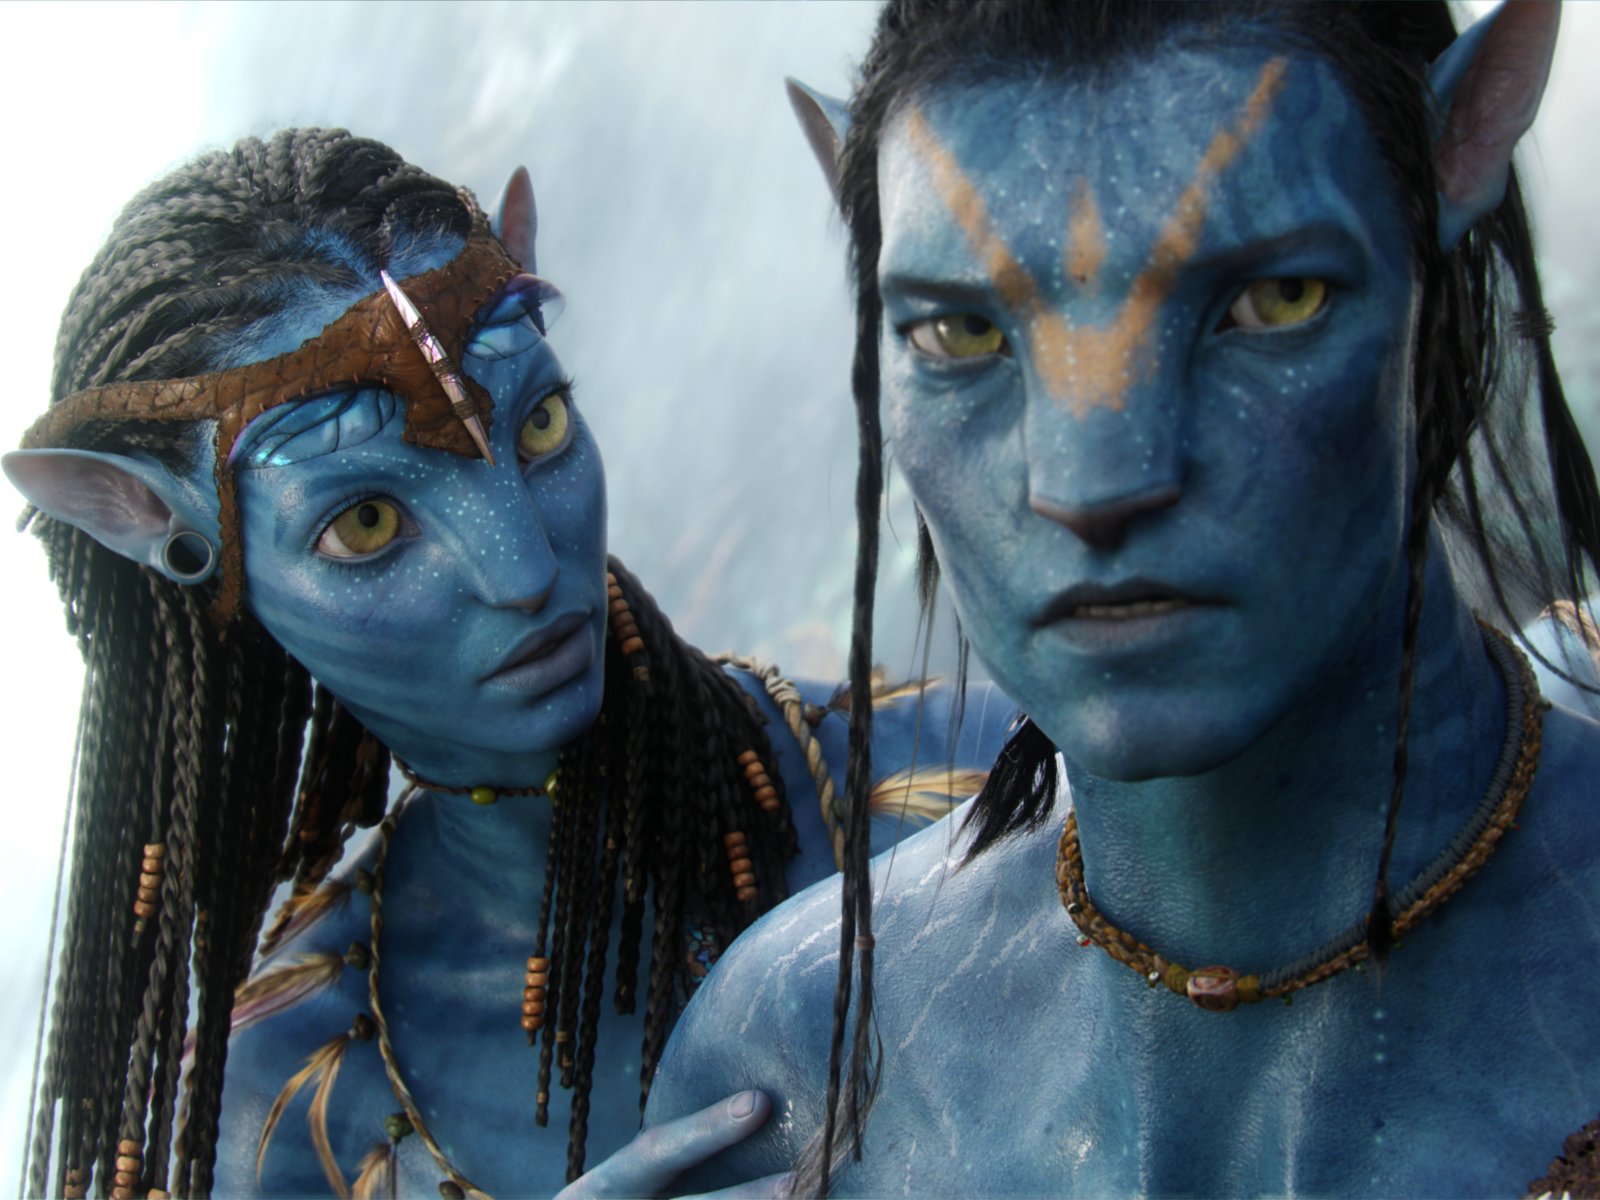 Download High quality Avatar wallpaper / Movies / 1600x1200